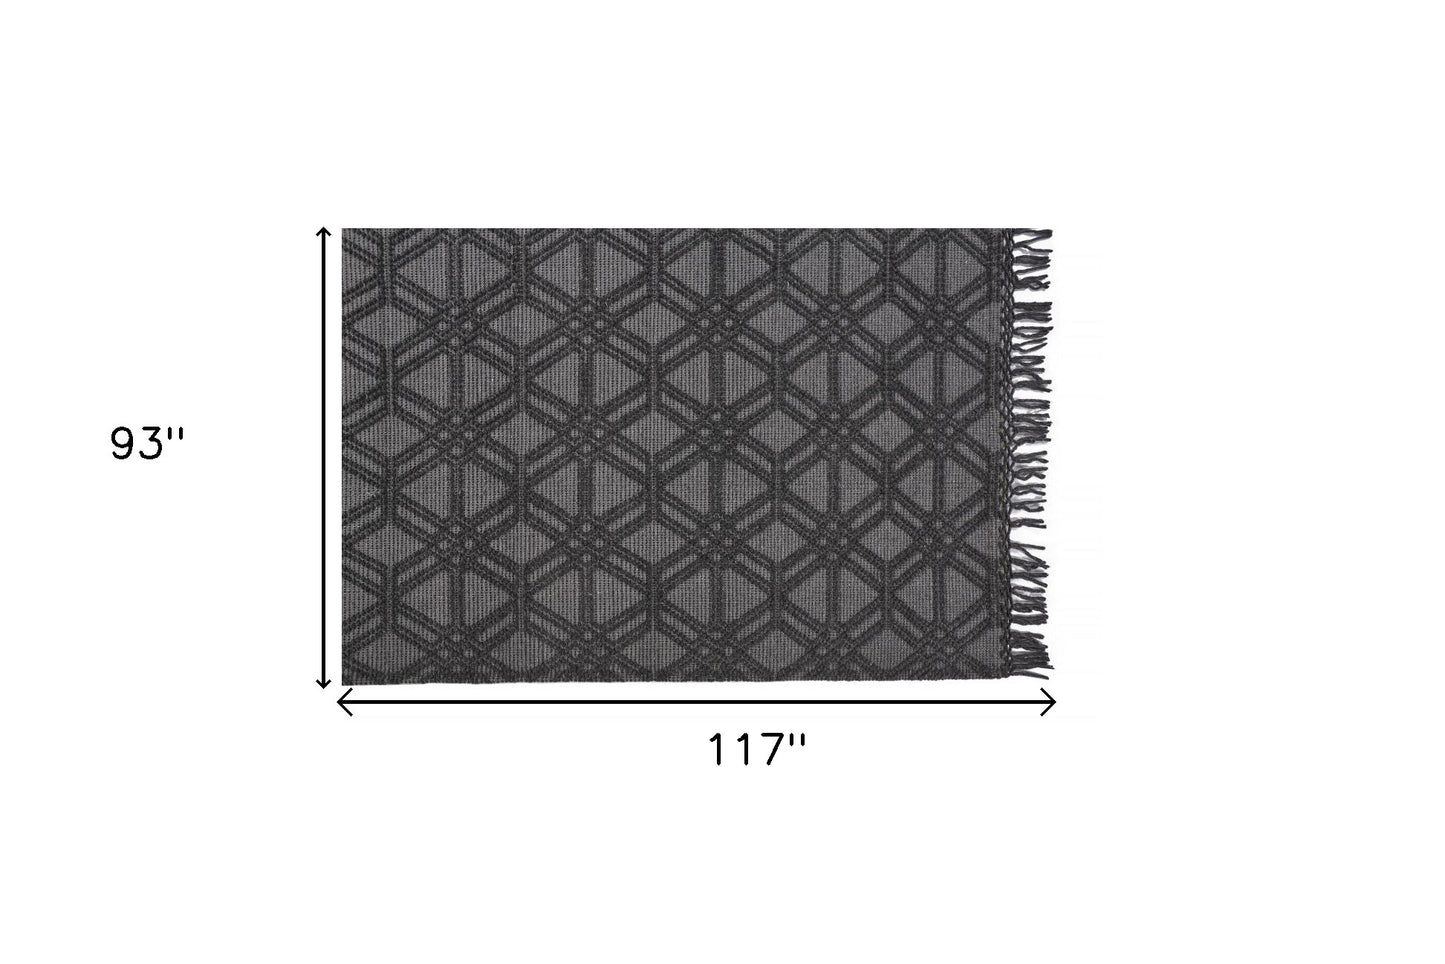 5' X 8' Black And Gray Wool Geometric Hand Woven Area Rug With Fringe